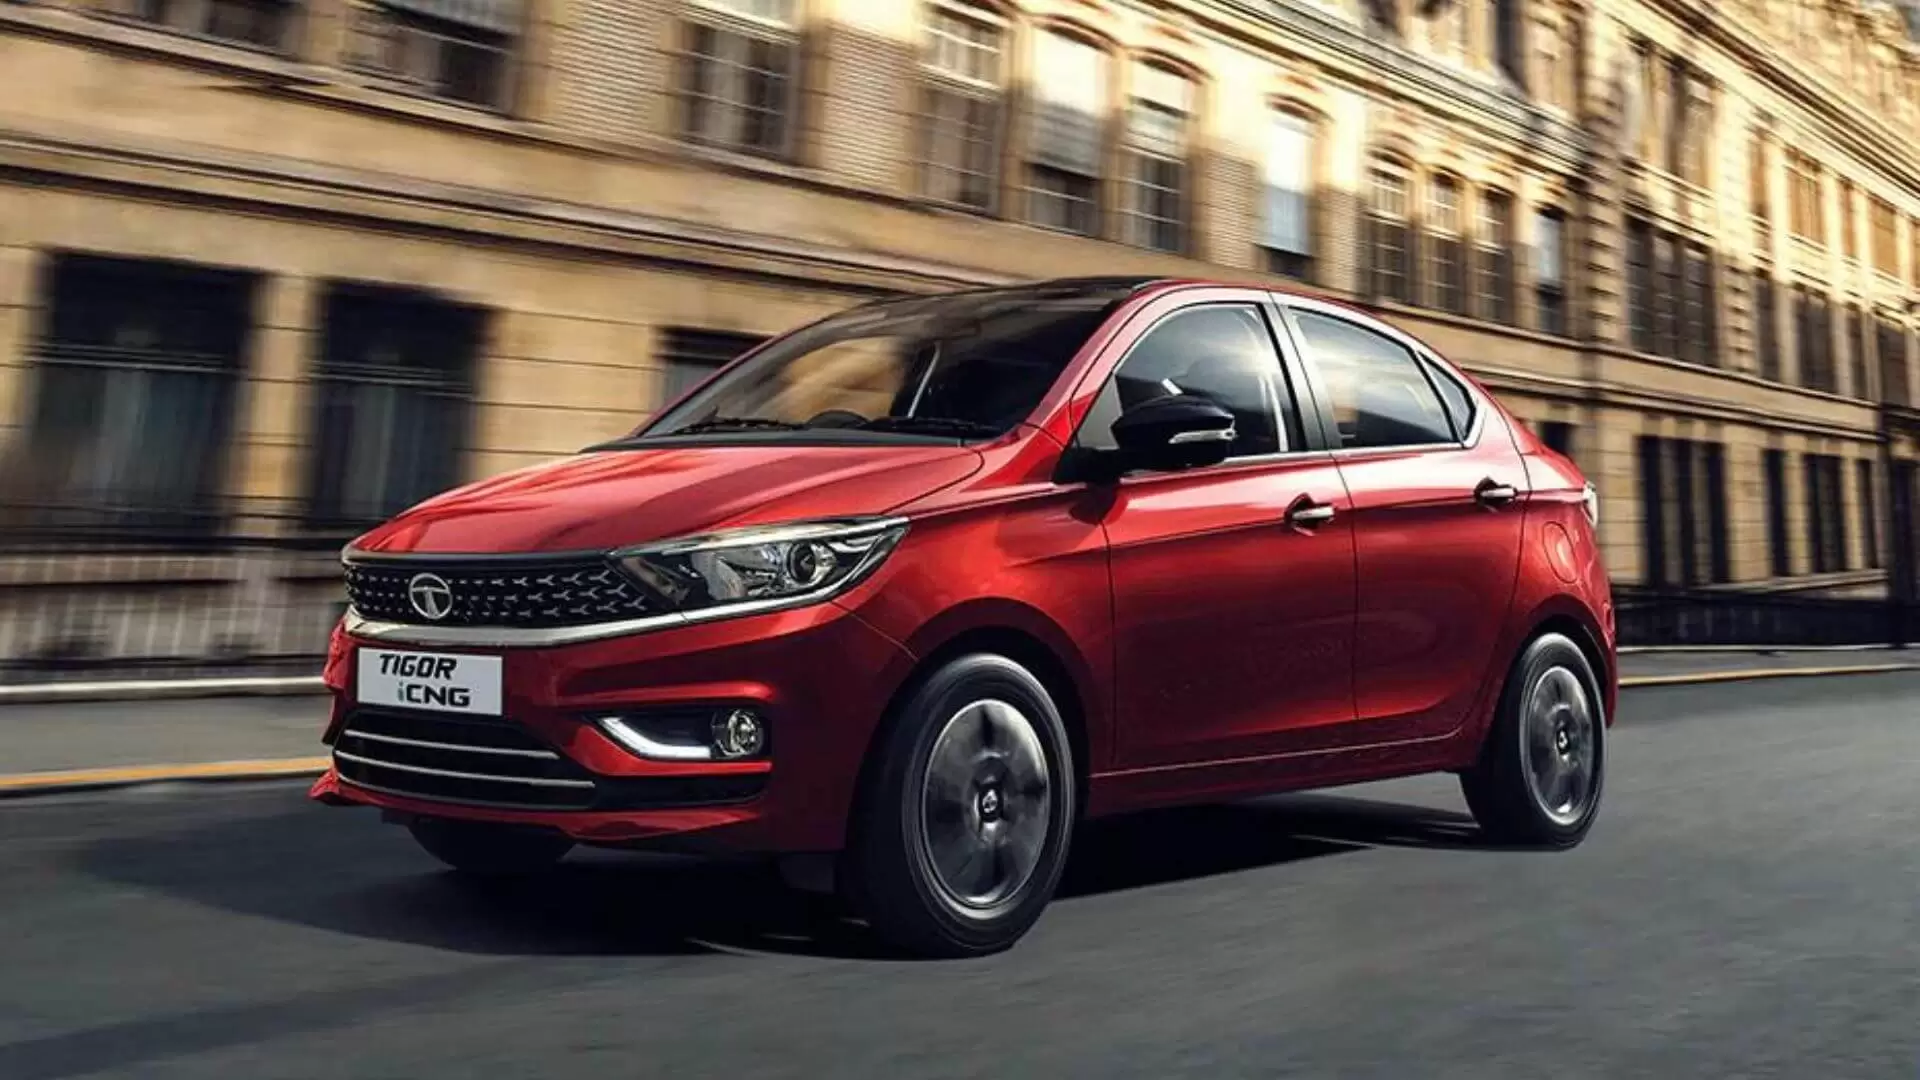 Top Interesting Things To Know About The Tata Tigor (1)